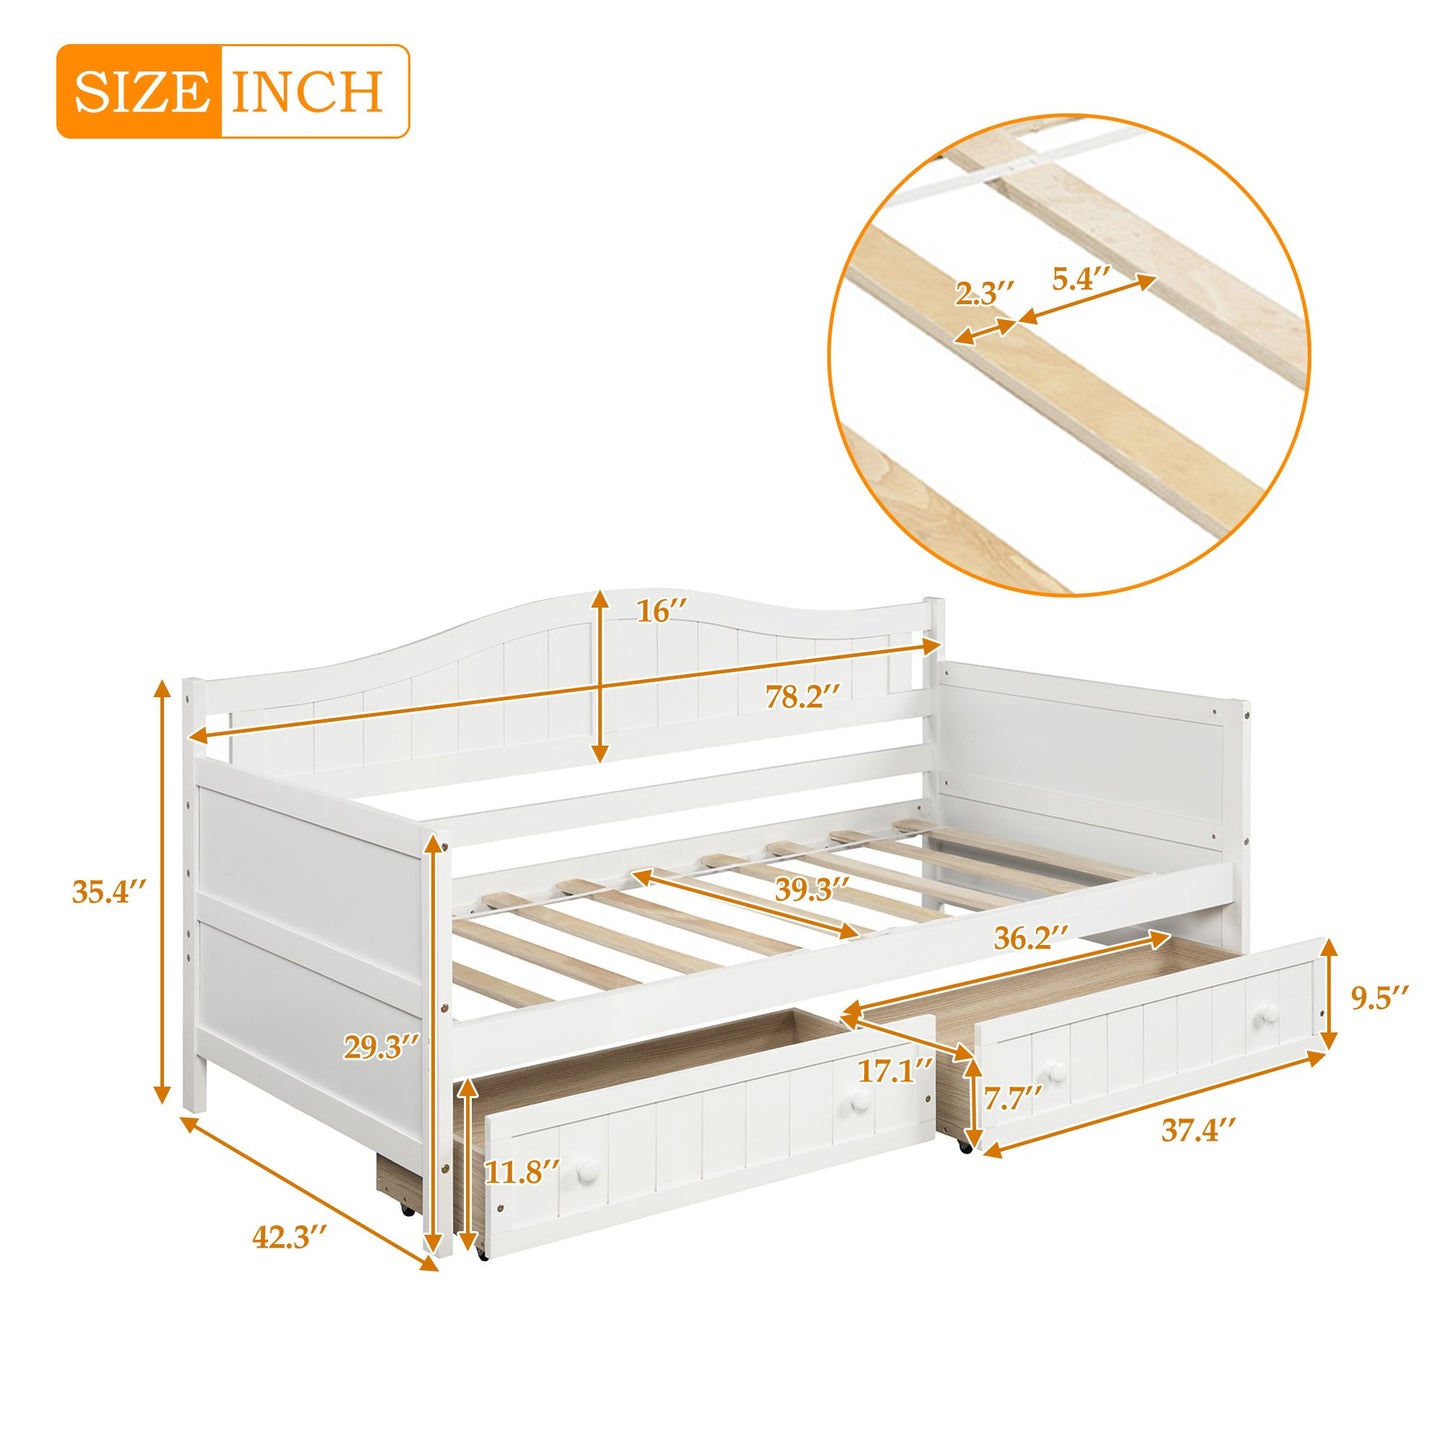 Twin White Pinewood Daybed with Two Drawers and High Curved Back-Daybed-HomeDaybed